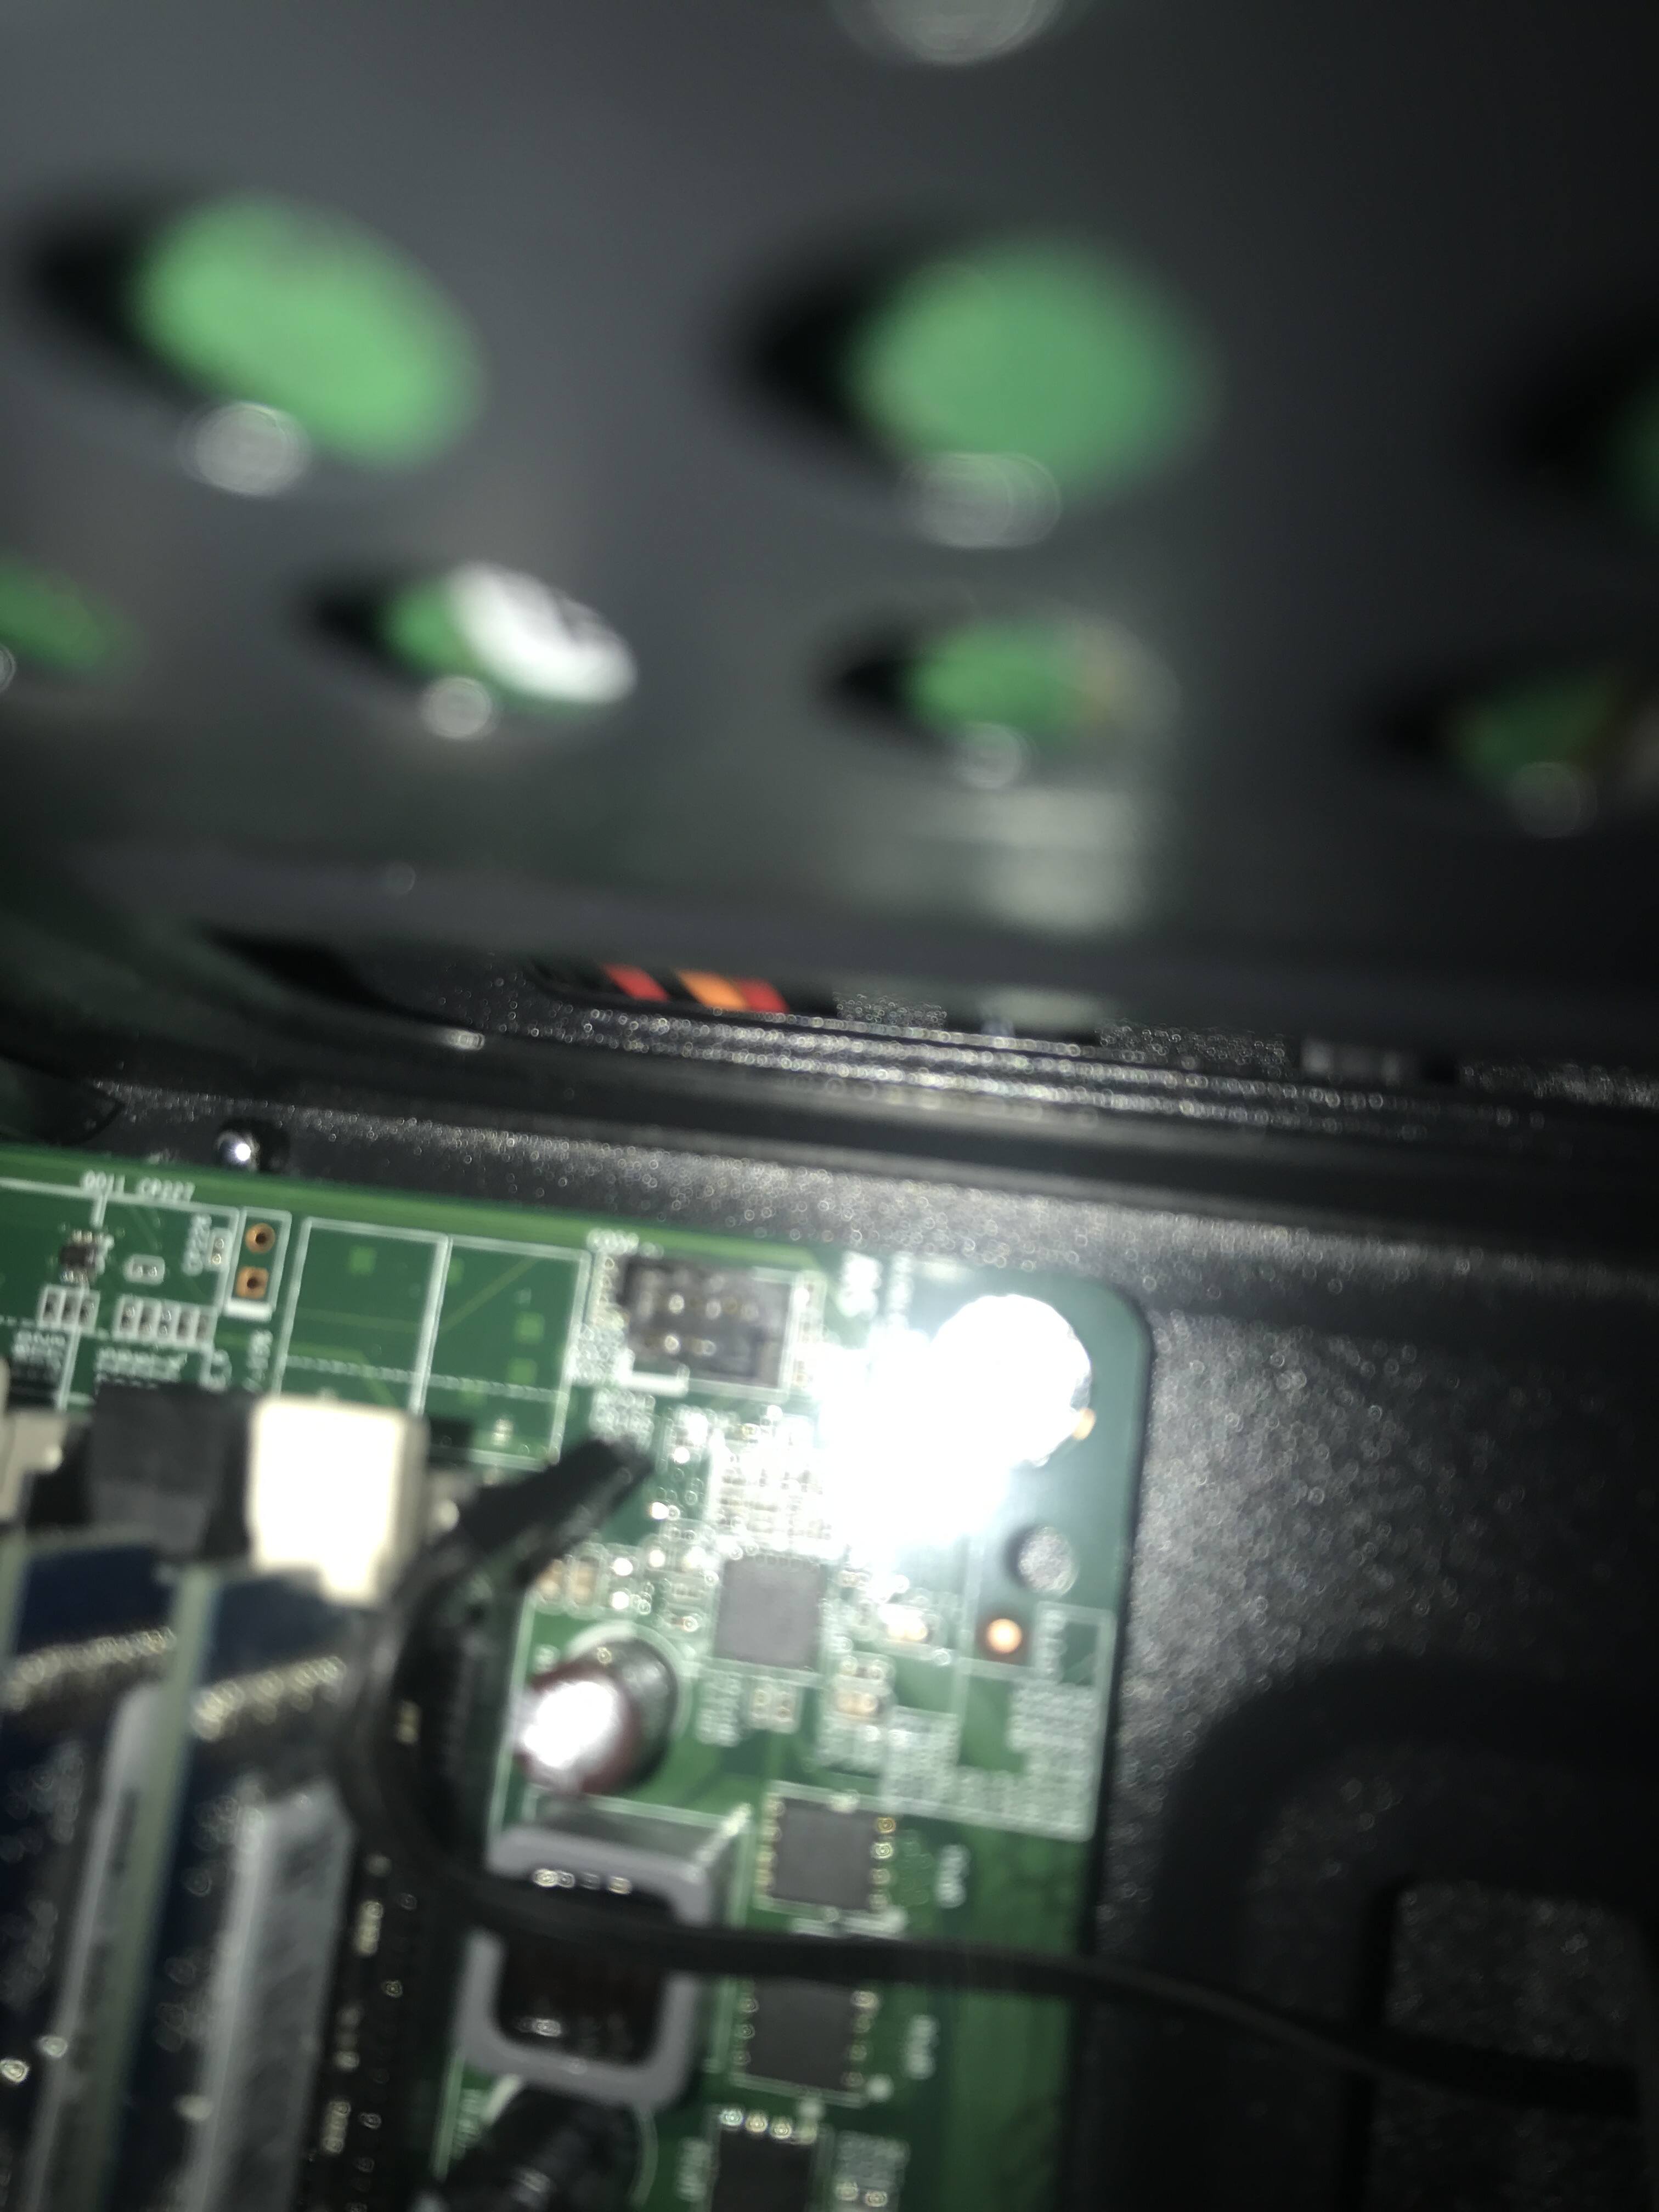 dell optiplex. does anyone know what this button does? It gets